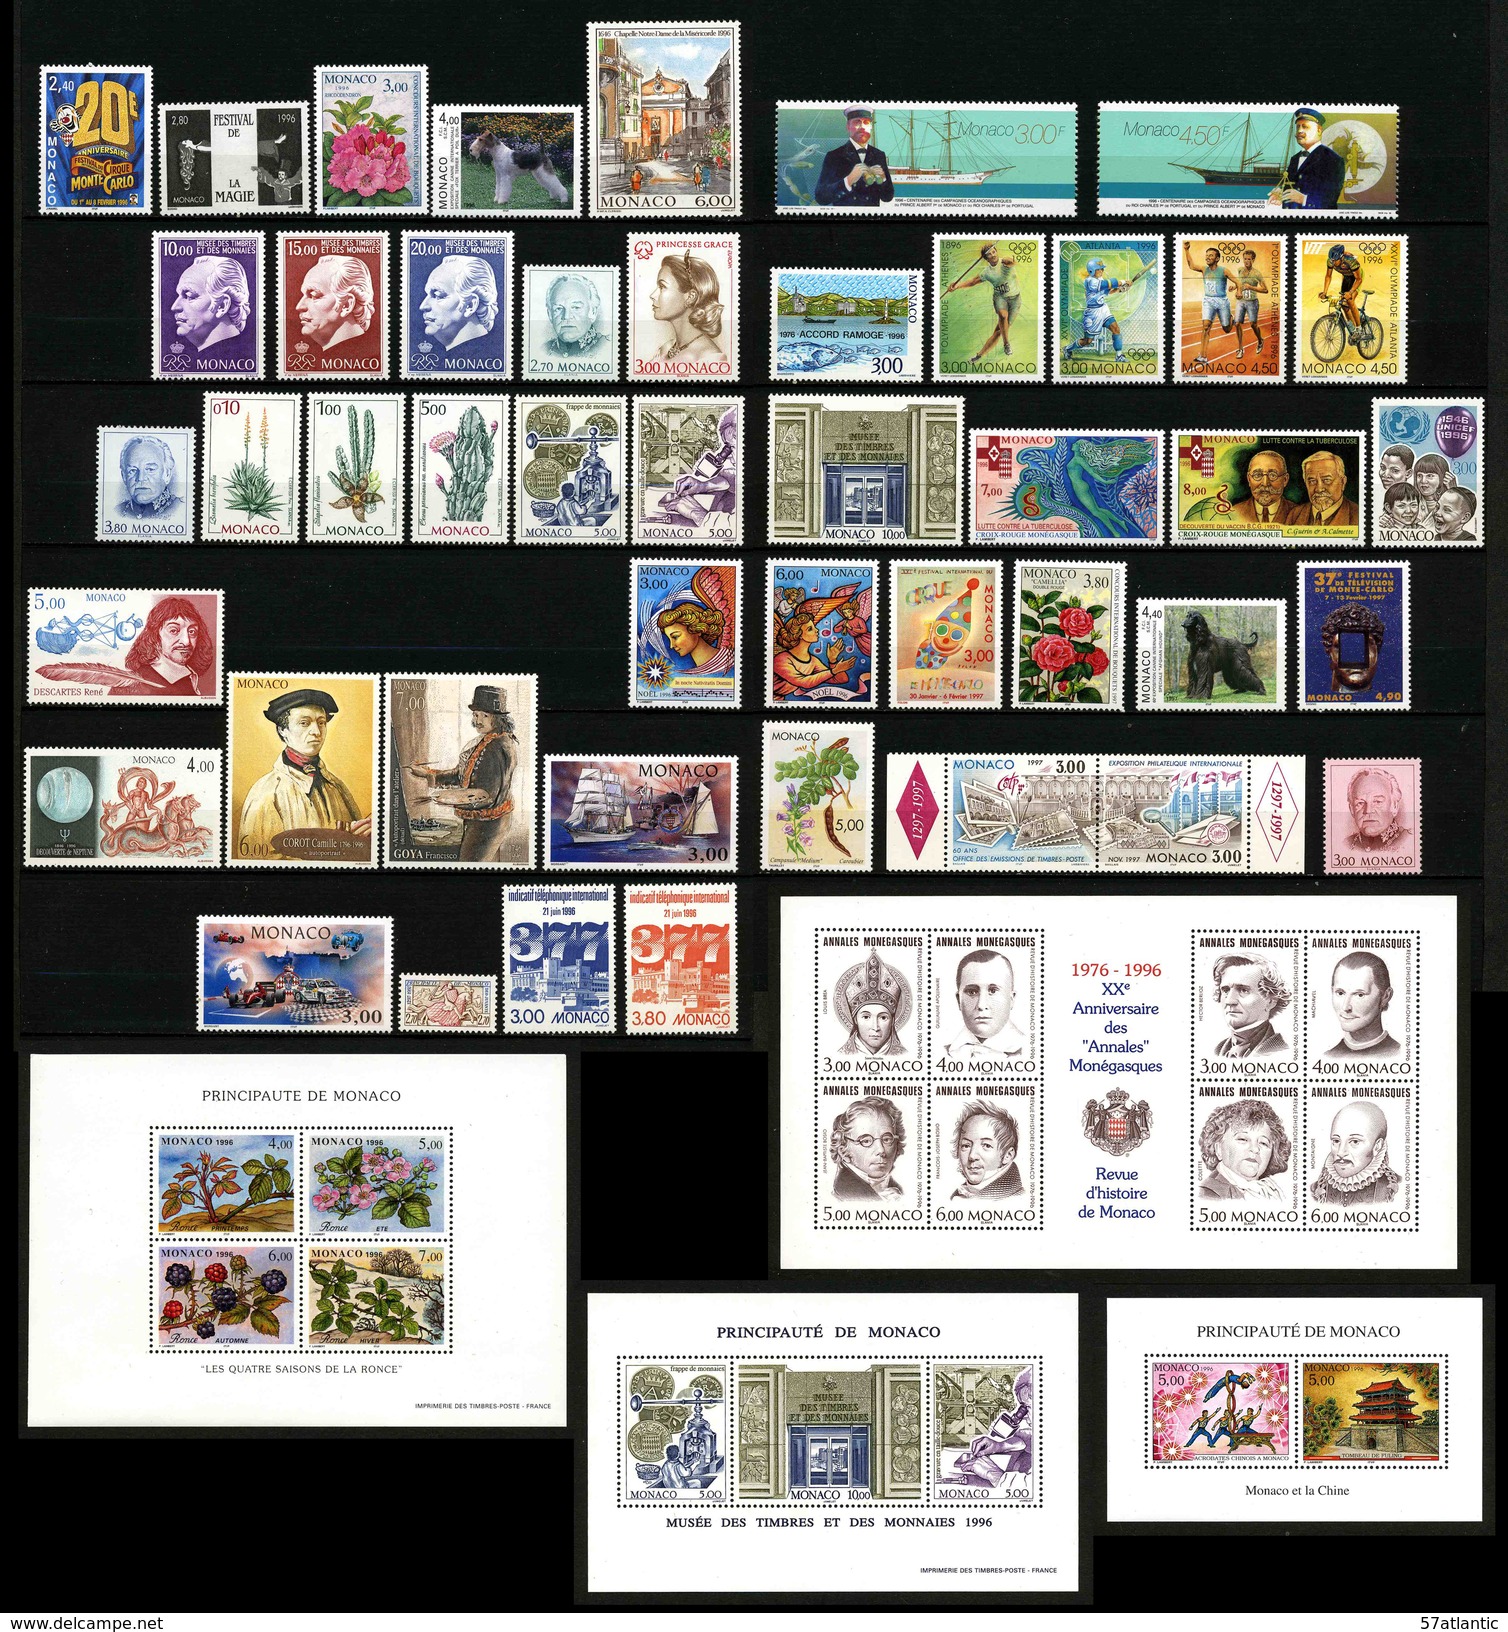 MONACO - ANNEE COMPLETE 1996 - AVEC BLOCS - 46 TIMBRES NEUFS ** + 4 BLOCS NEUFS ** - Full Years